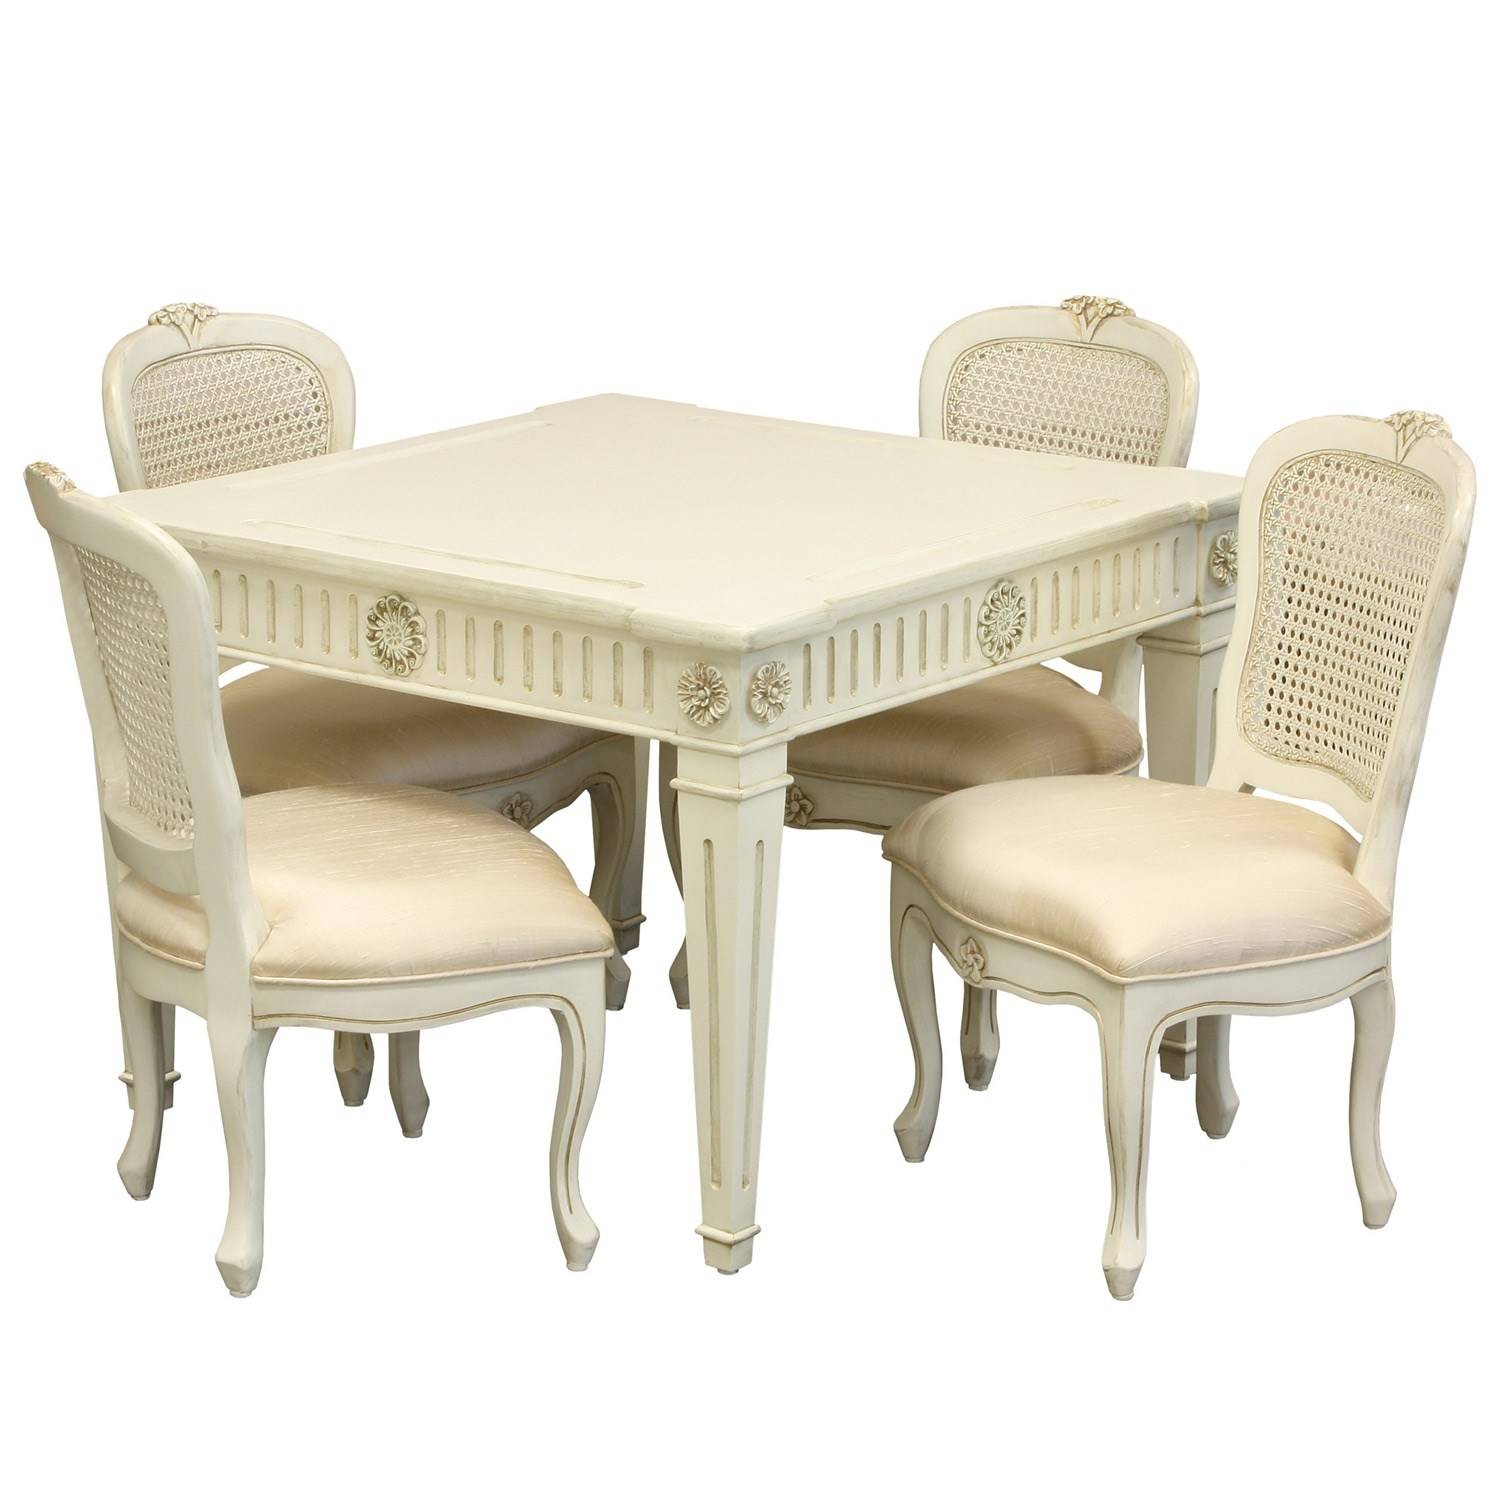 Childrens square table and side chair sets exciting kids tables